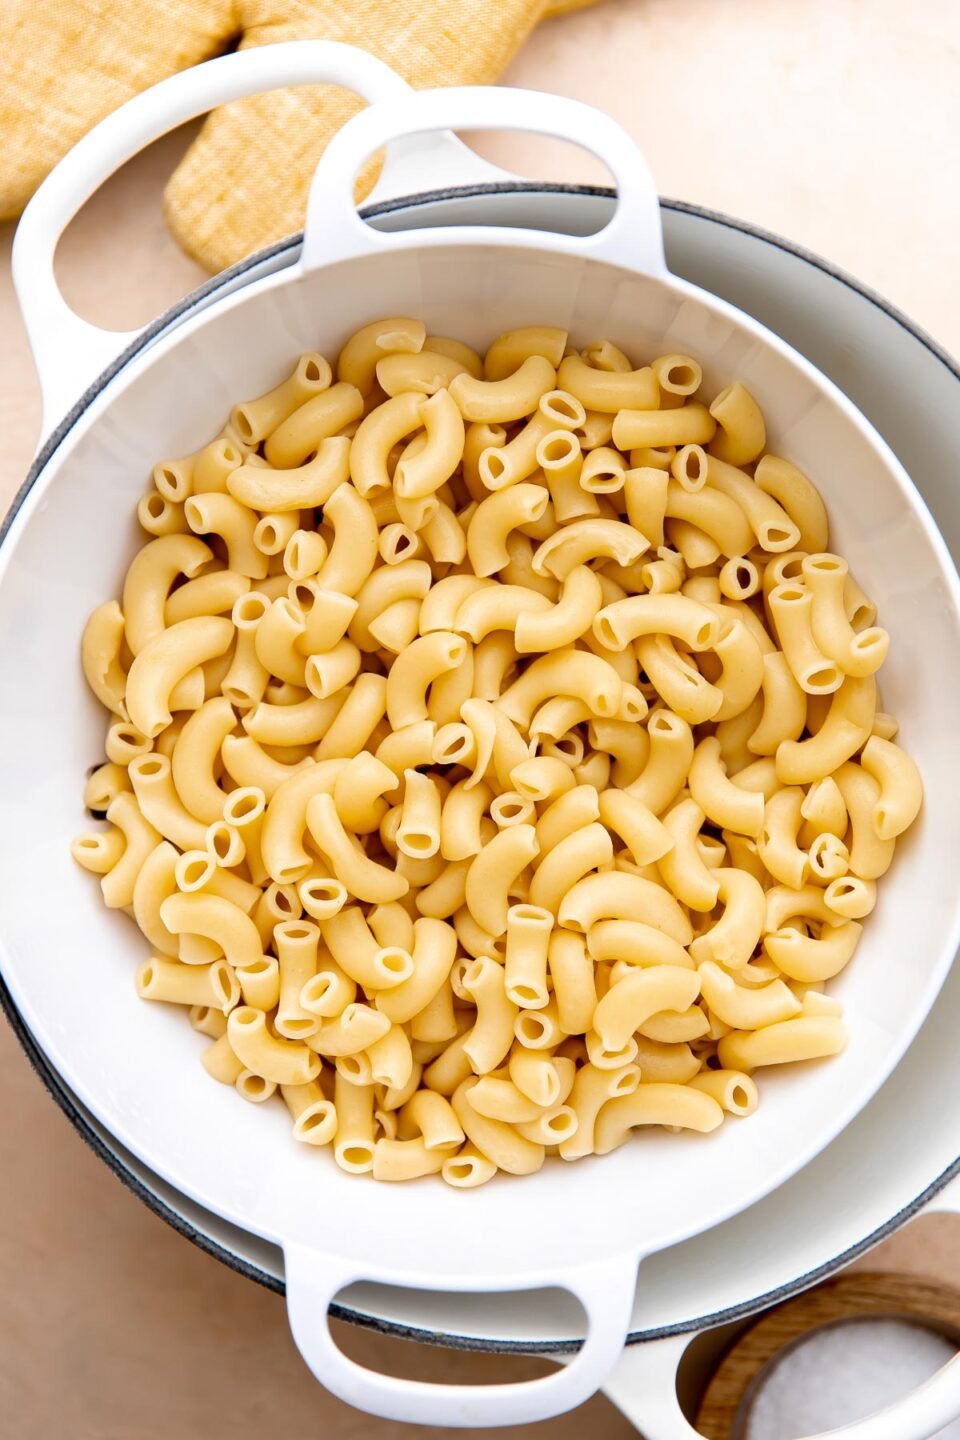 A white colander filled with al dente macaroni pasta for hawaiian macaroni salad rests inside of a large white double handle pot to drain. The pot sits atop a peach colored textured surface and is surrounded by a creamy yellow colored oven mitt and a small wooden pinch bowl filled with kosher salt.